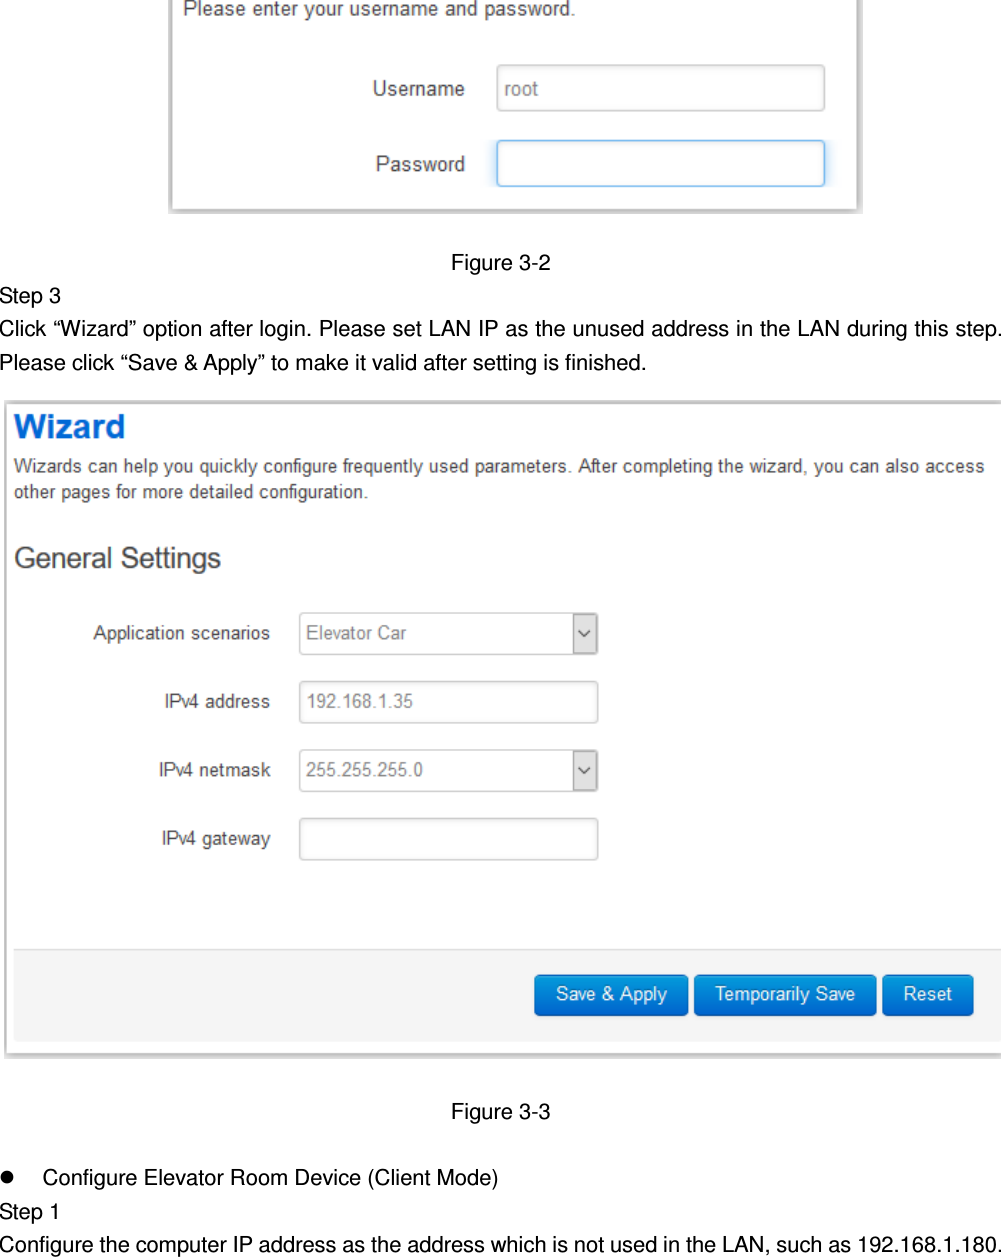             Figure 3-2 Step 3   Click “Wizard” option after login. Please set LAN IP as the unused address in the LAN during this step. Please click “Save &amp; Apply” to make it valid after setting is finished.    Figure 3-3    Configure Elevator Room Device (Client Mode) Step 1   Configure the computer IP address as the address which is not used in the LAN, such as 192.168.1.180.   